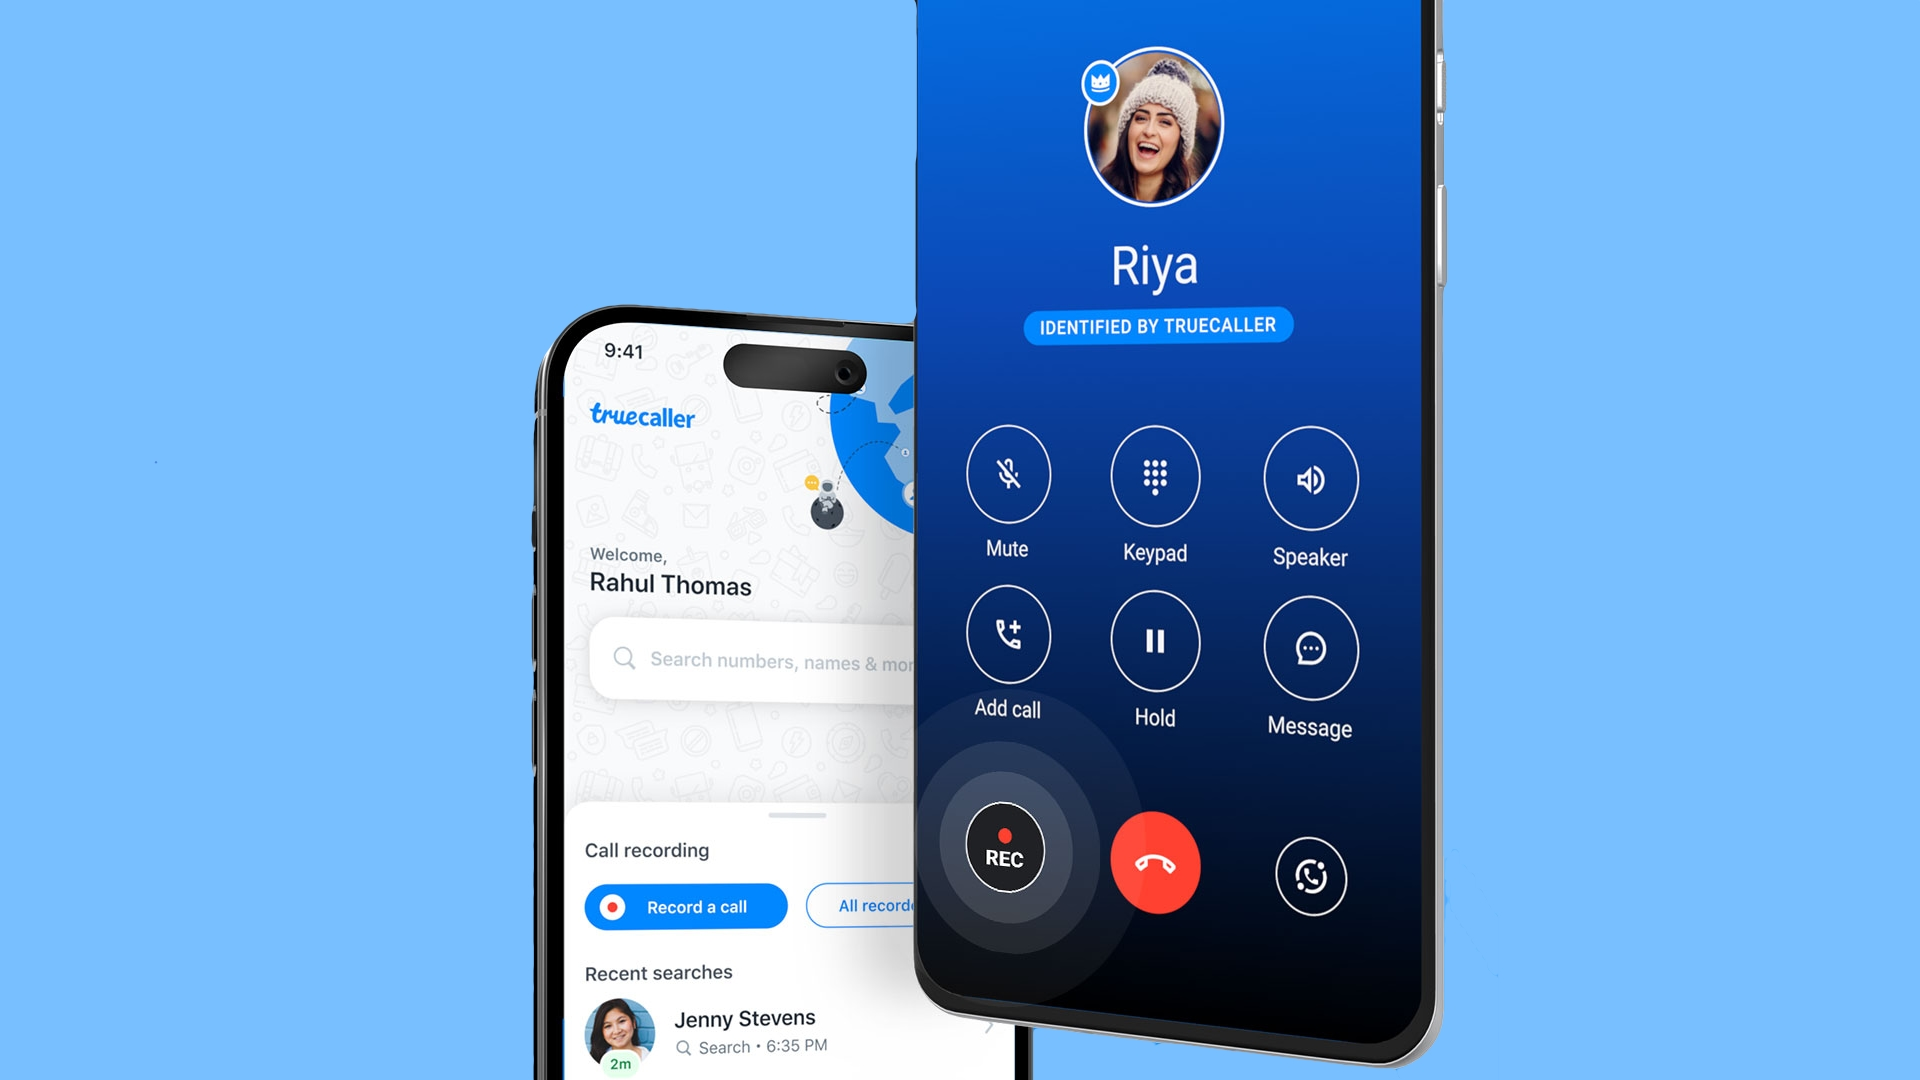 Truecaller and Microsoft Divulge Artificial Intelligence Voice To Answer Calls Automatically